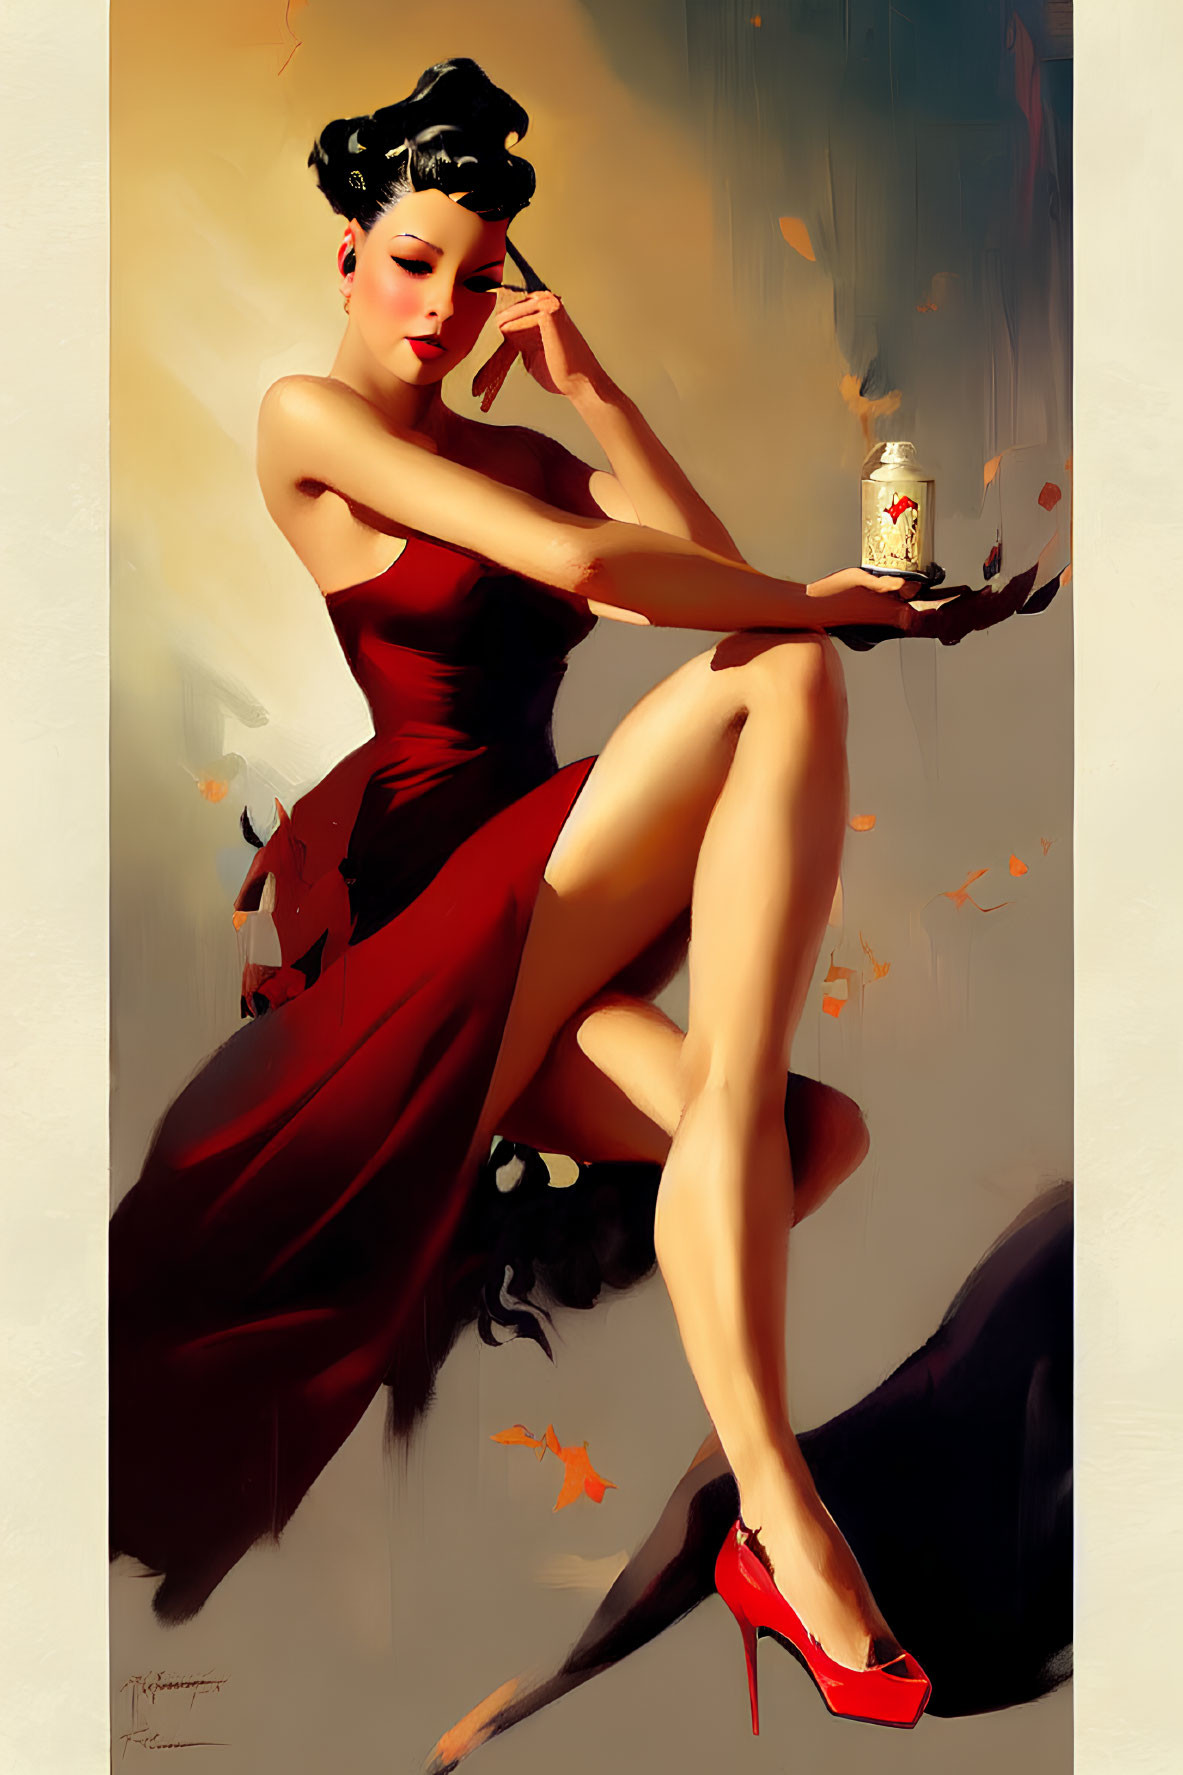 Stylized illustration of woman in red dress with beverage